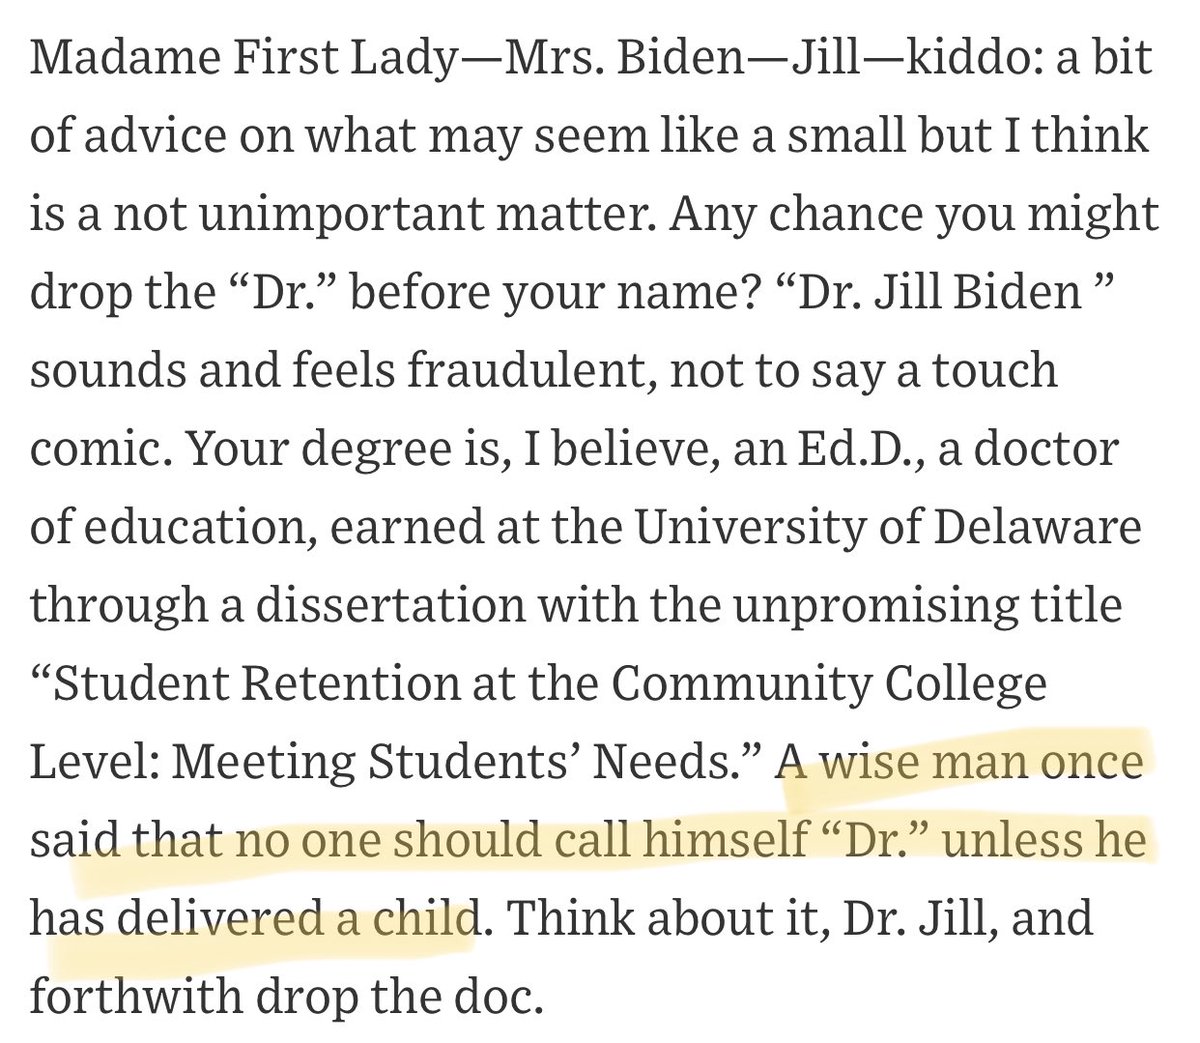 I delivered my first child, a doctoral dissertation in English literature, in 2008, and my second child, a human, in 2014. You may call me Dr. Jones. And I will call her Dr. Biden.